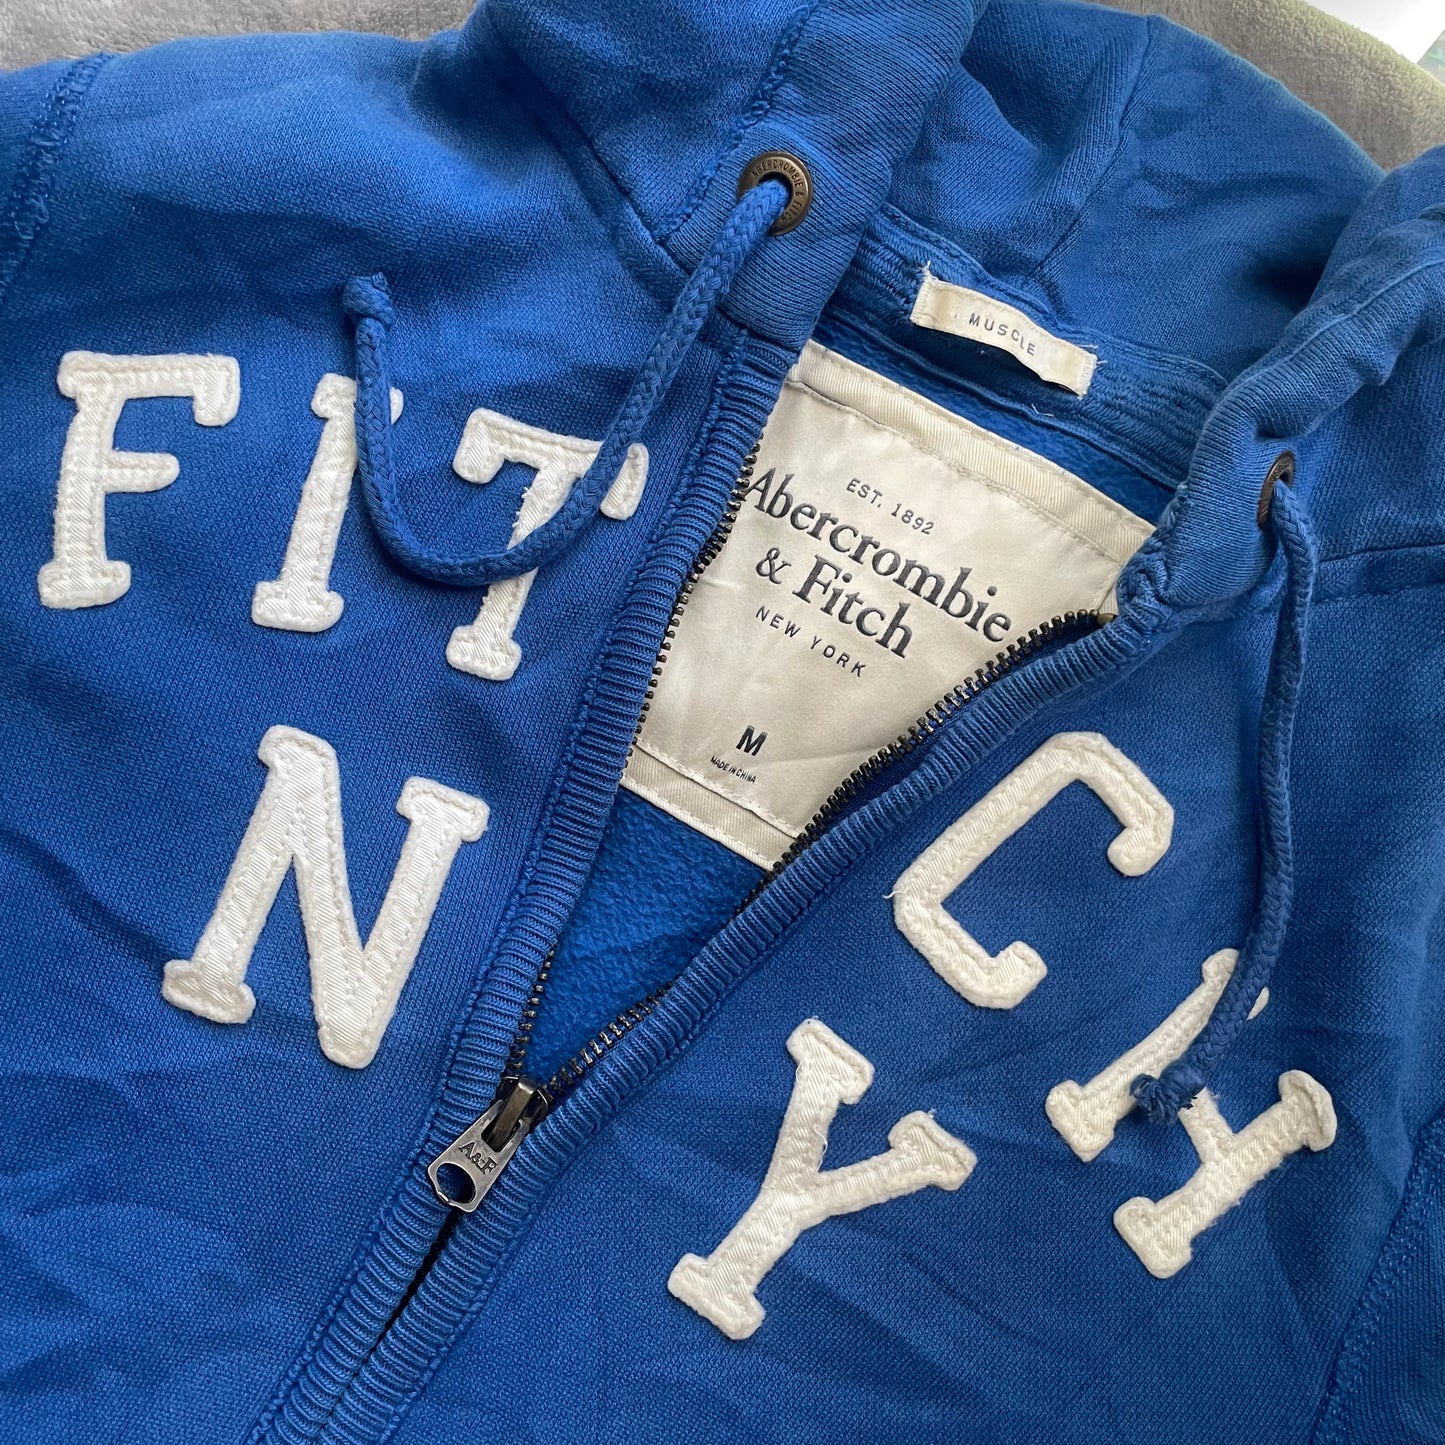 Abercrombie and Fitch graphic zip up hoodie jumper